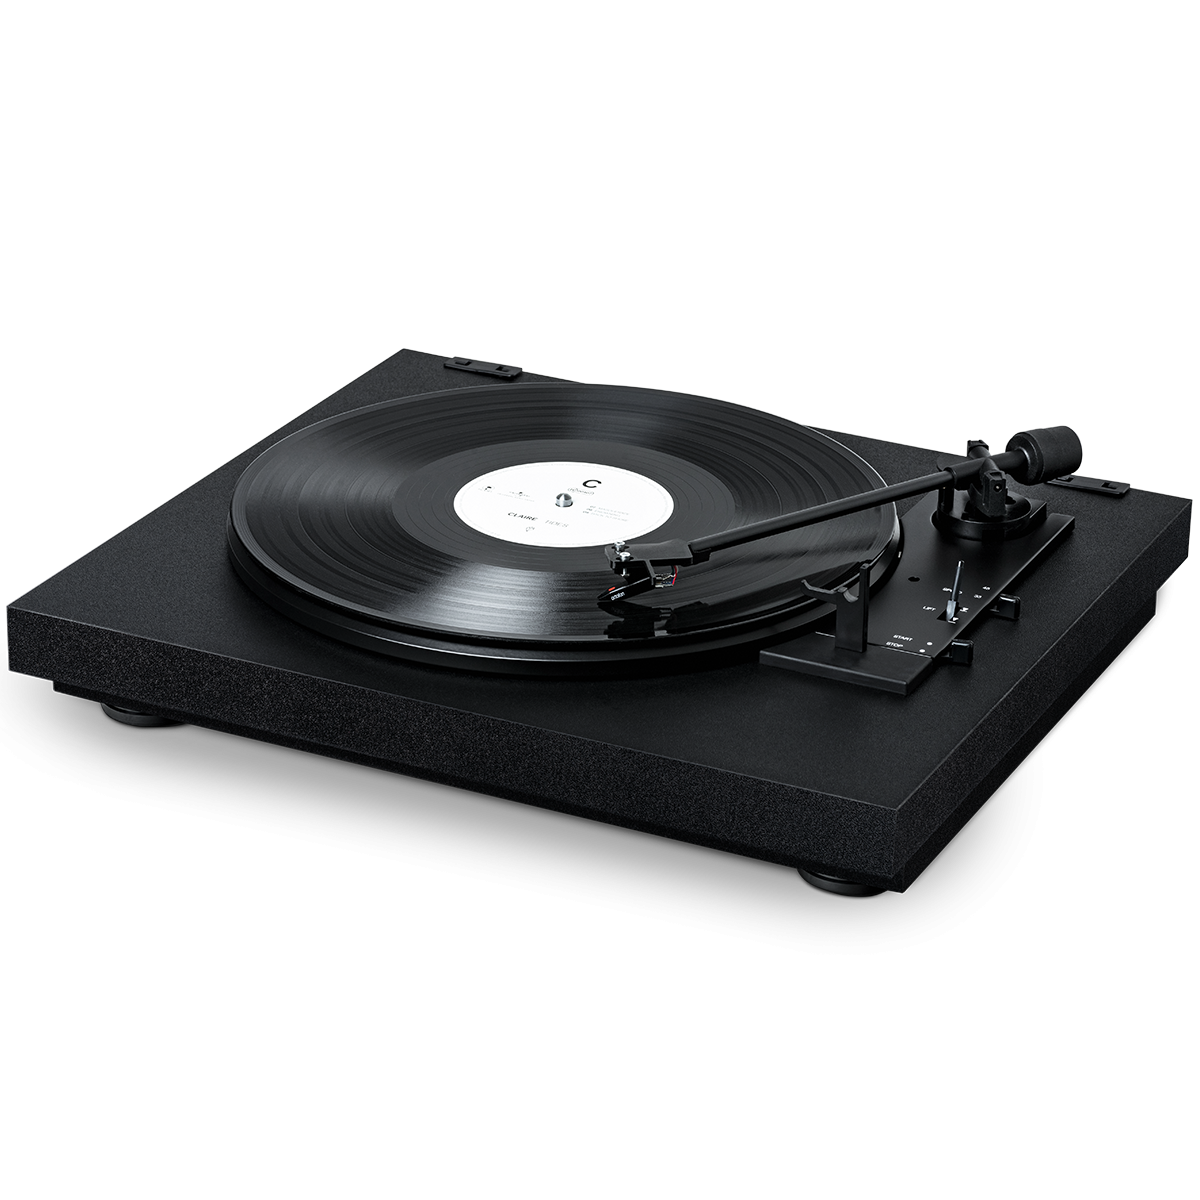 Pro-Ject Automat A1 Turntable shown at an angle
